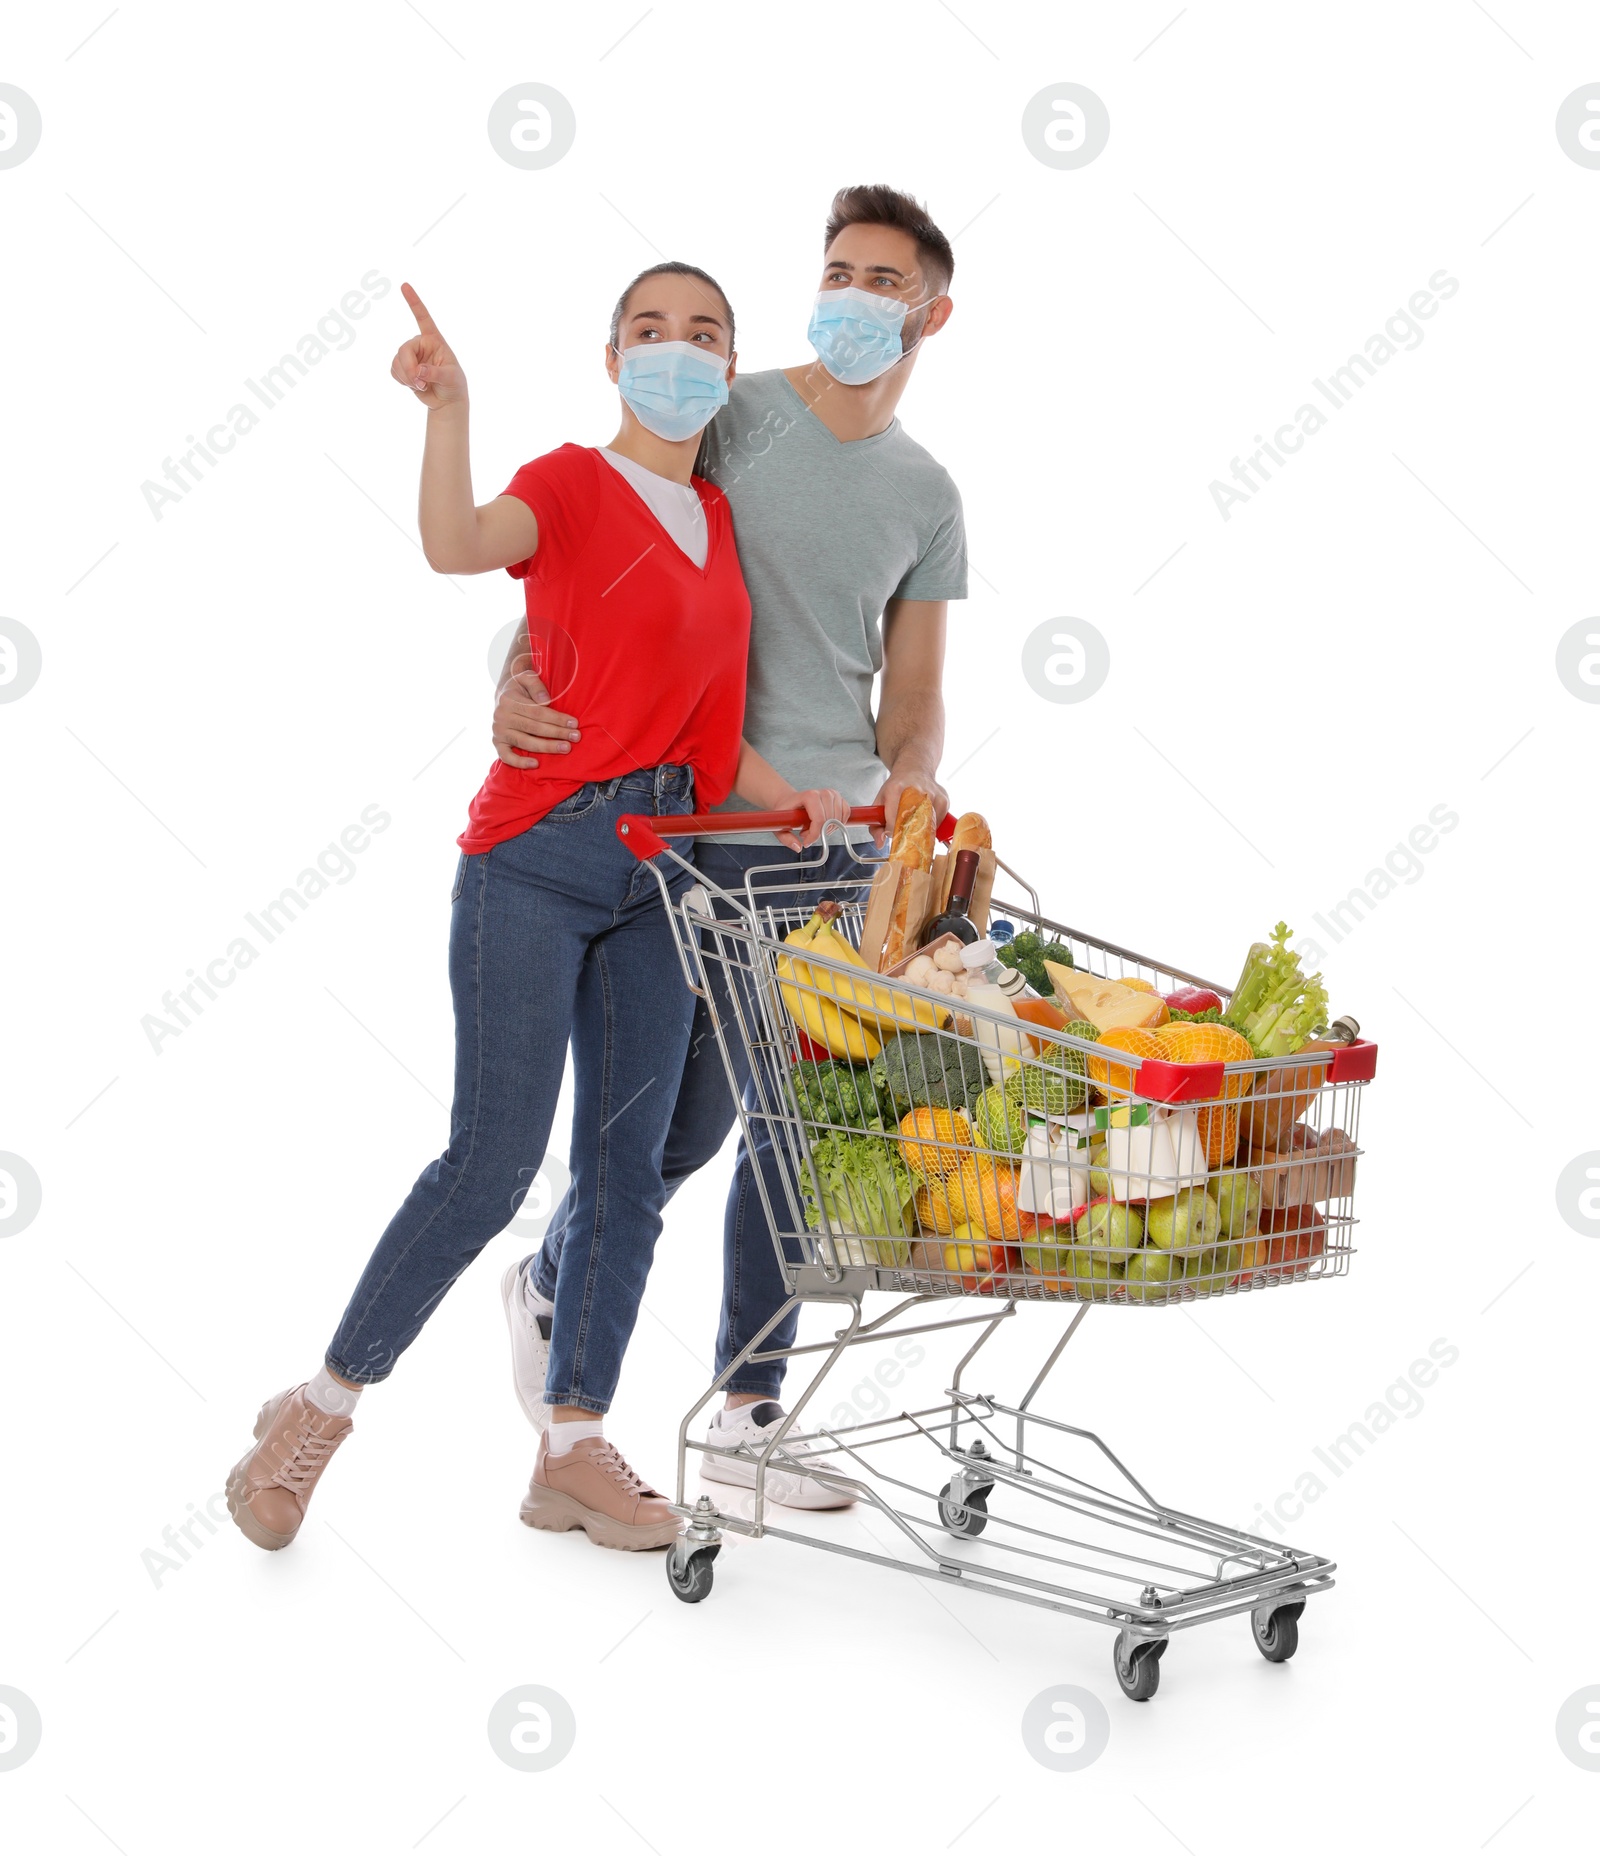 Photo of Couple with protective masks and shopping cart full of groceries on white background